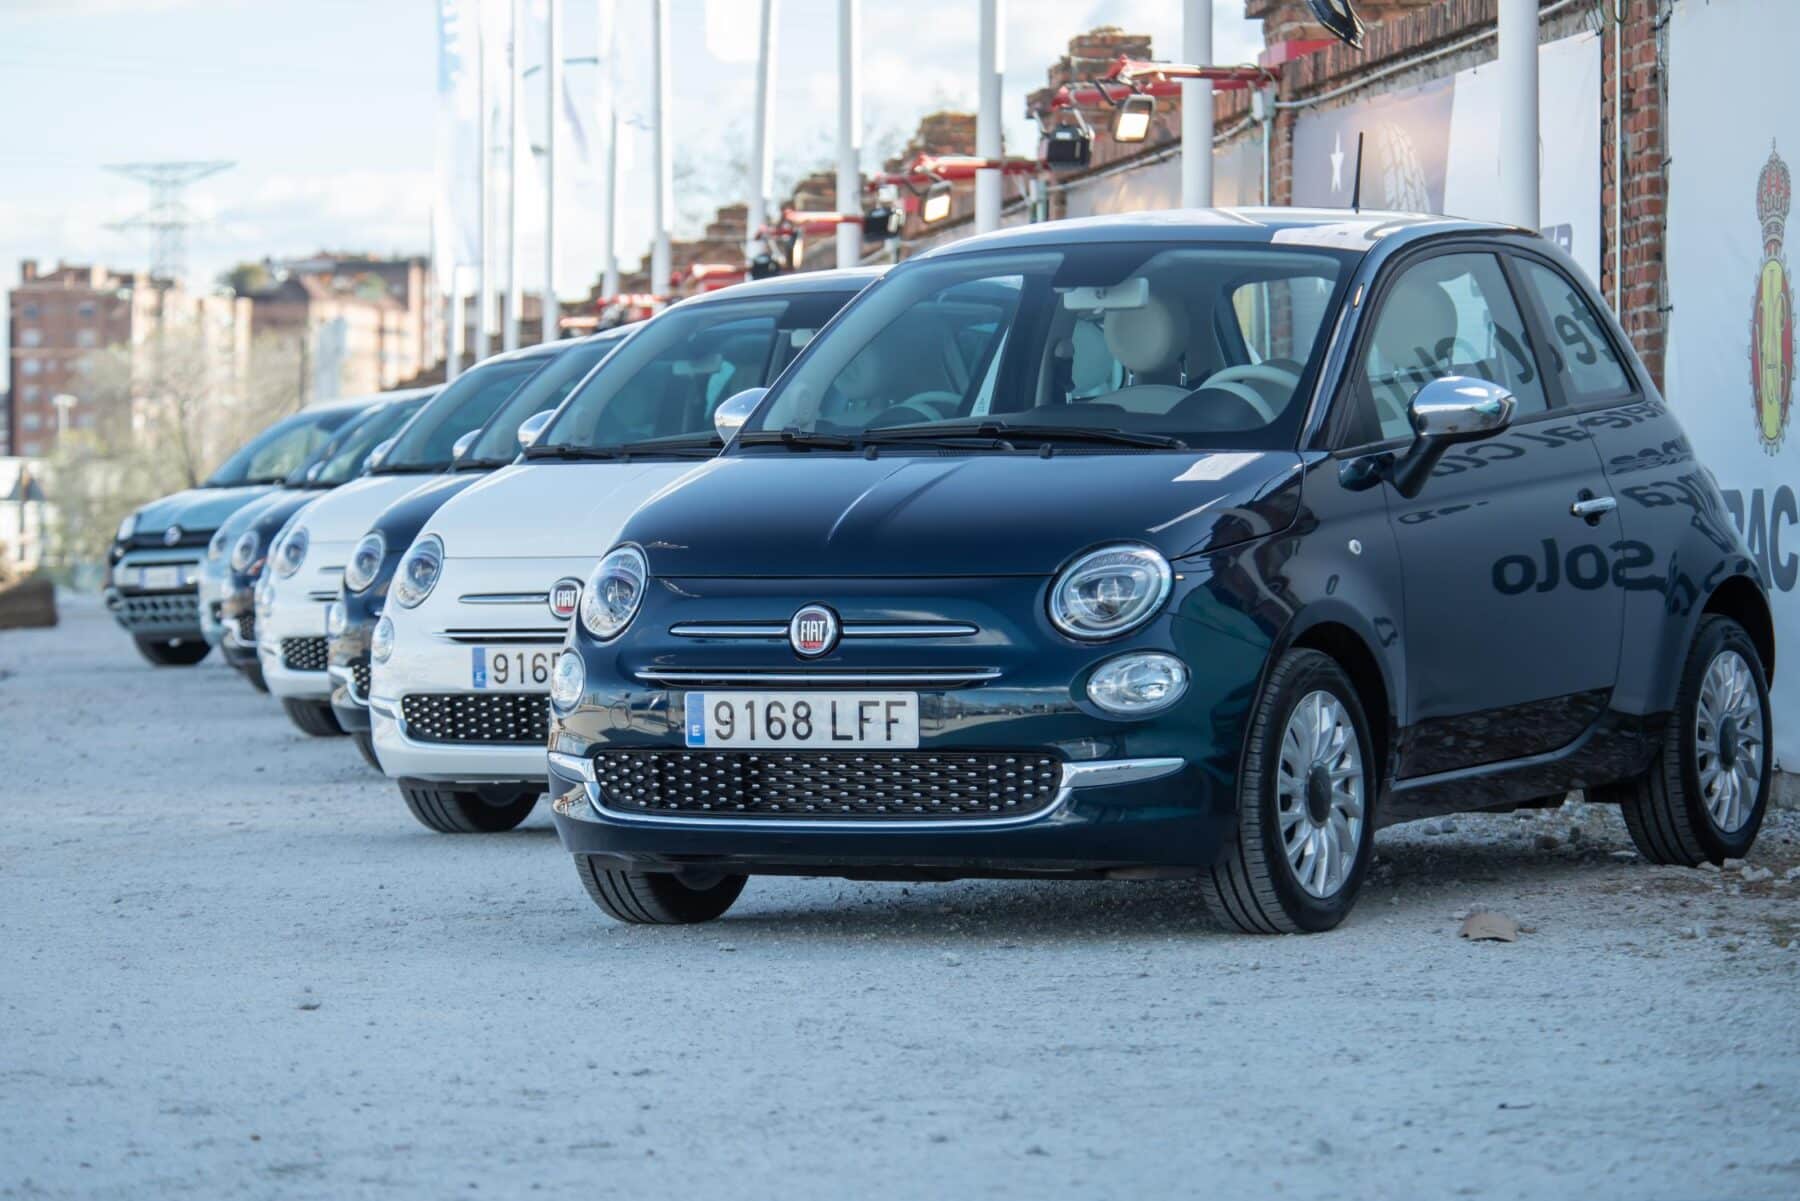 Here are the best-selling urban in Spain in 2020: Fiat domain